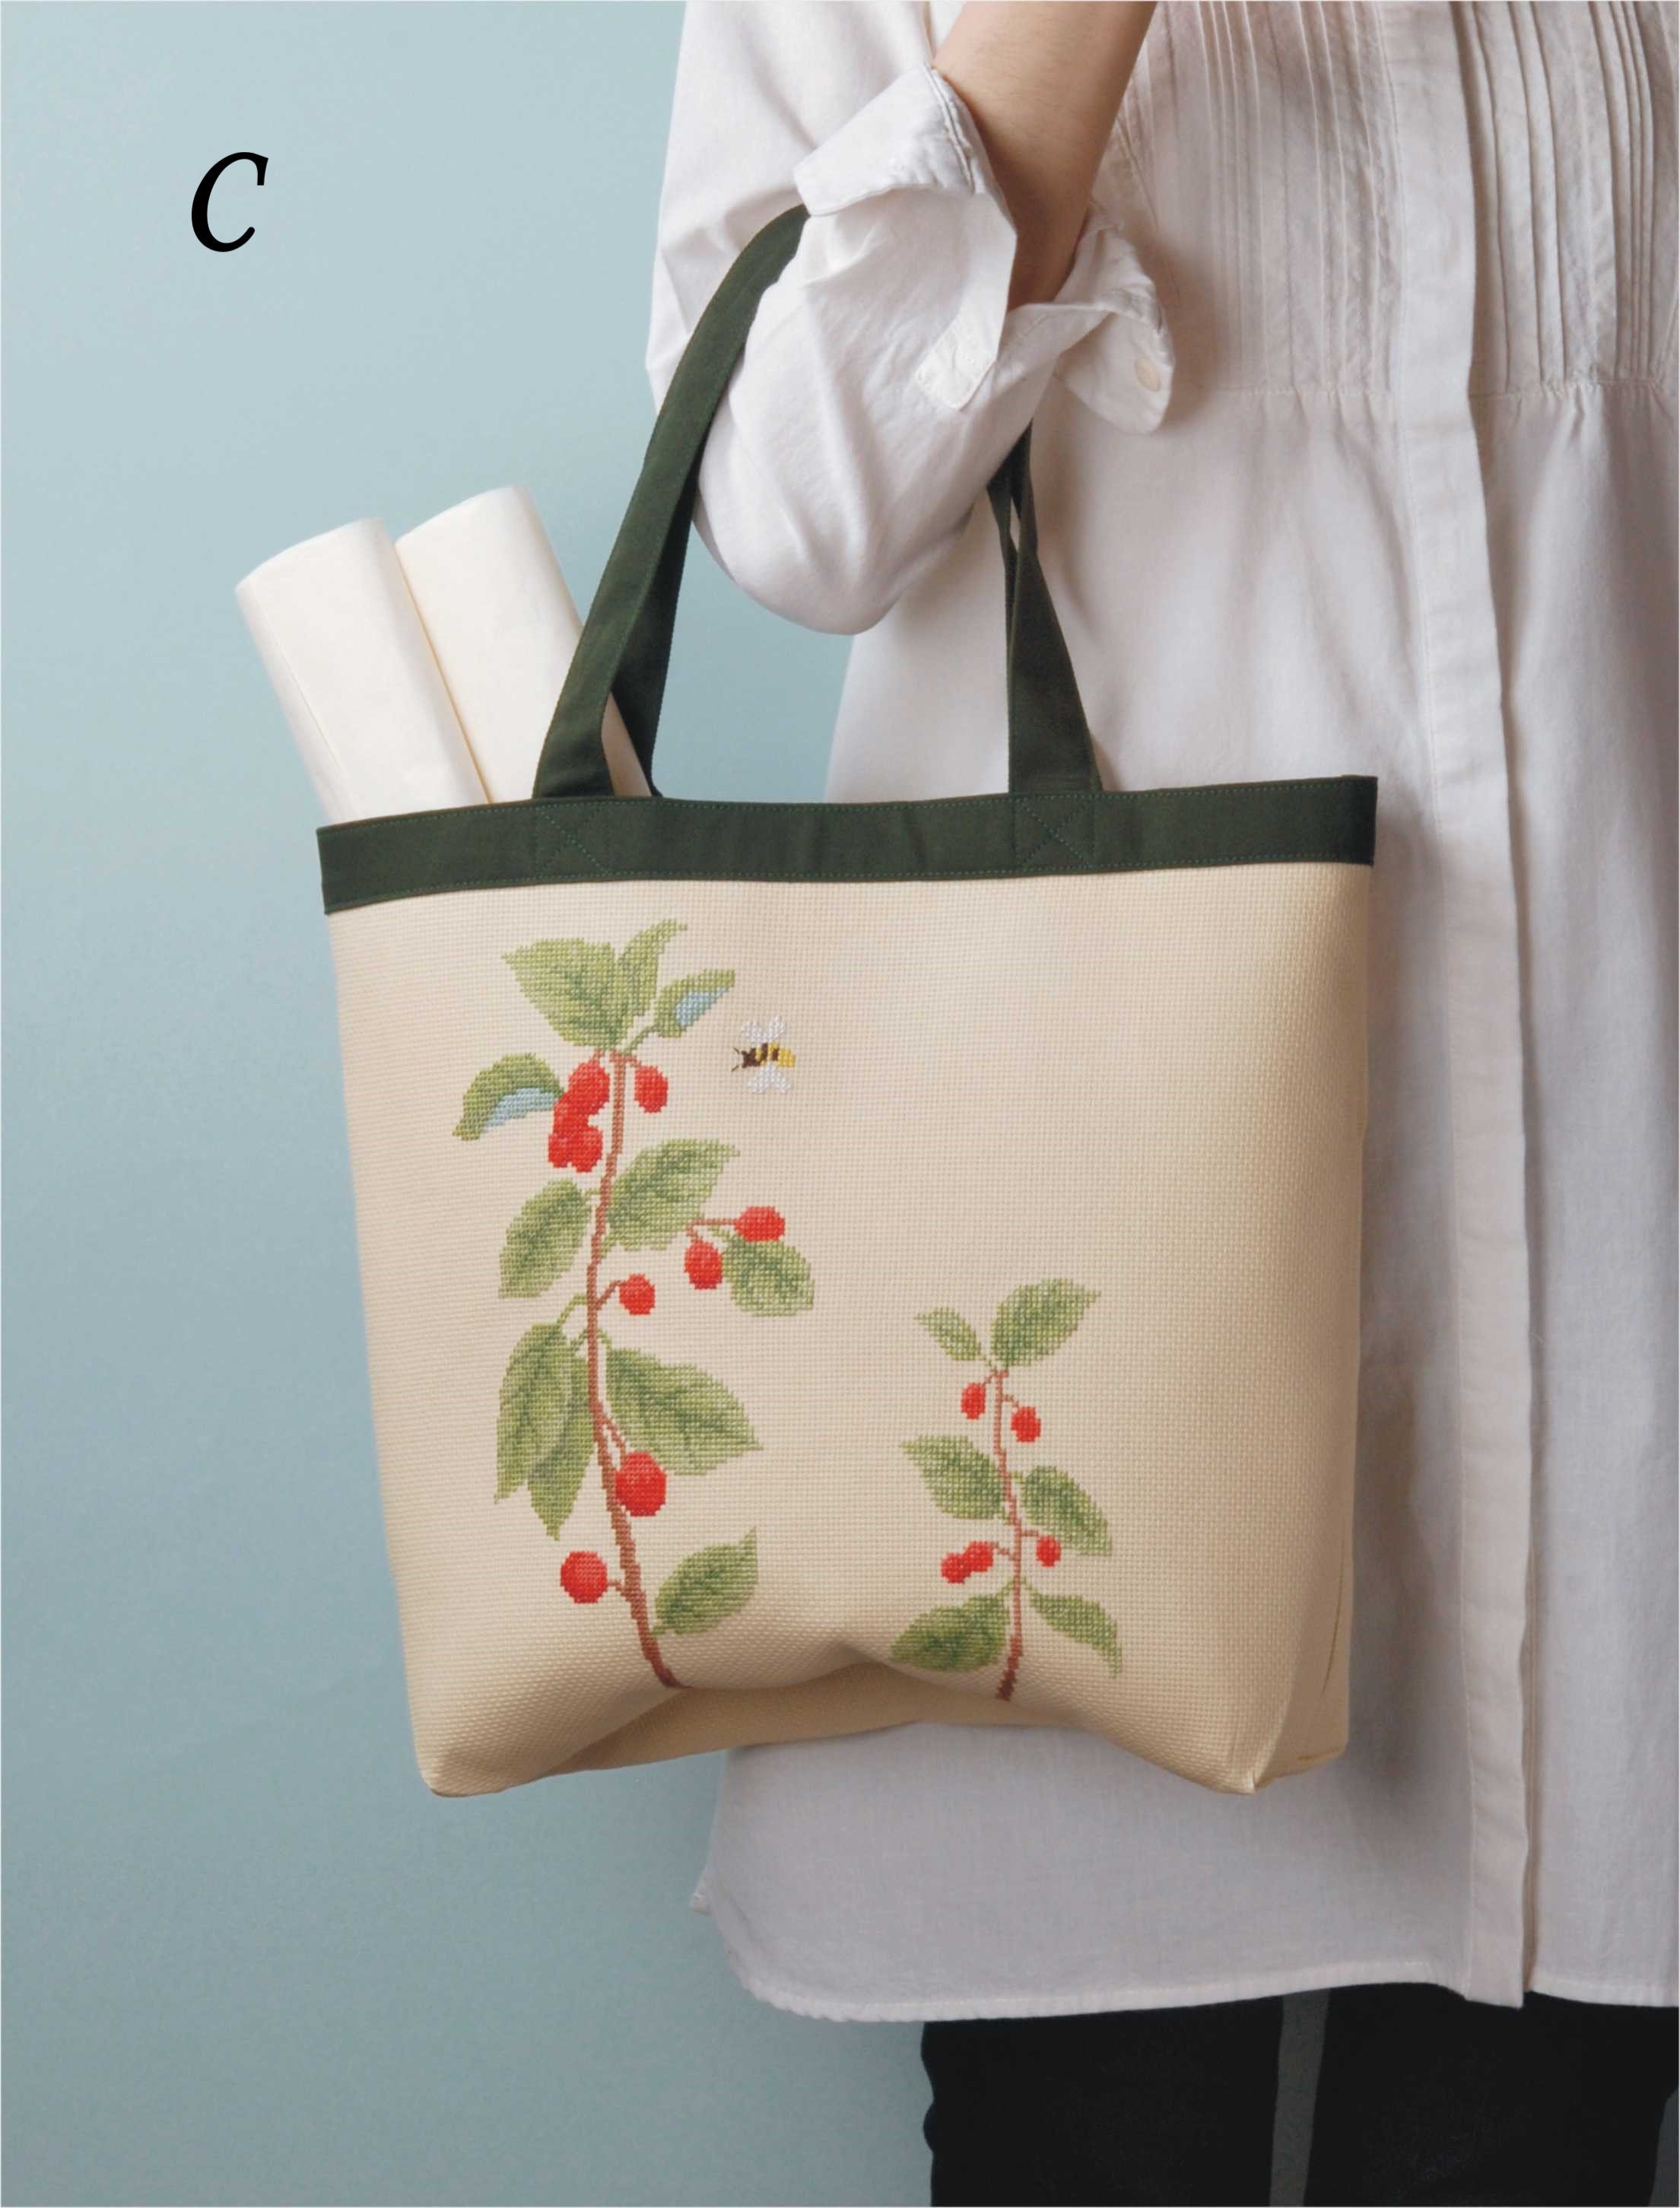 10 Ways to Decorate Blank Tote Bags